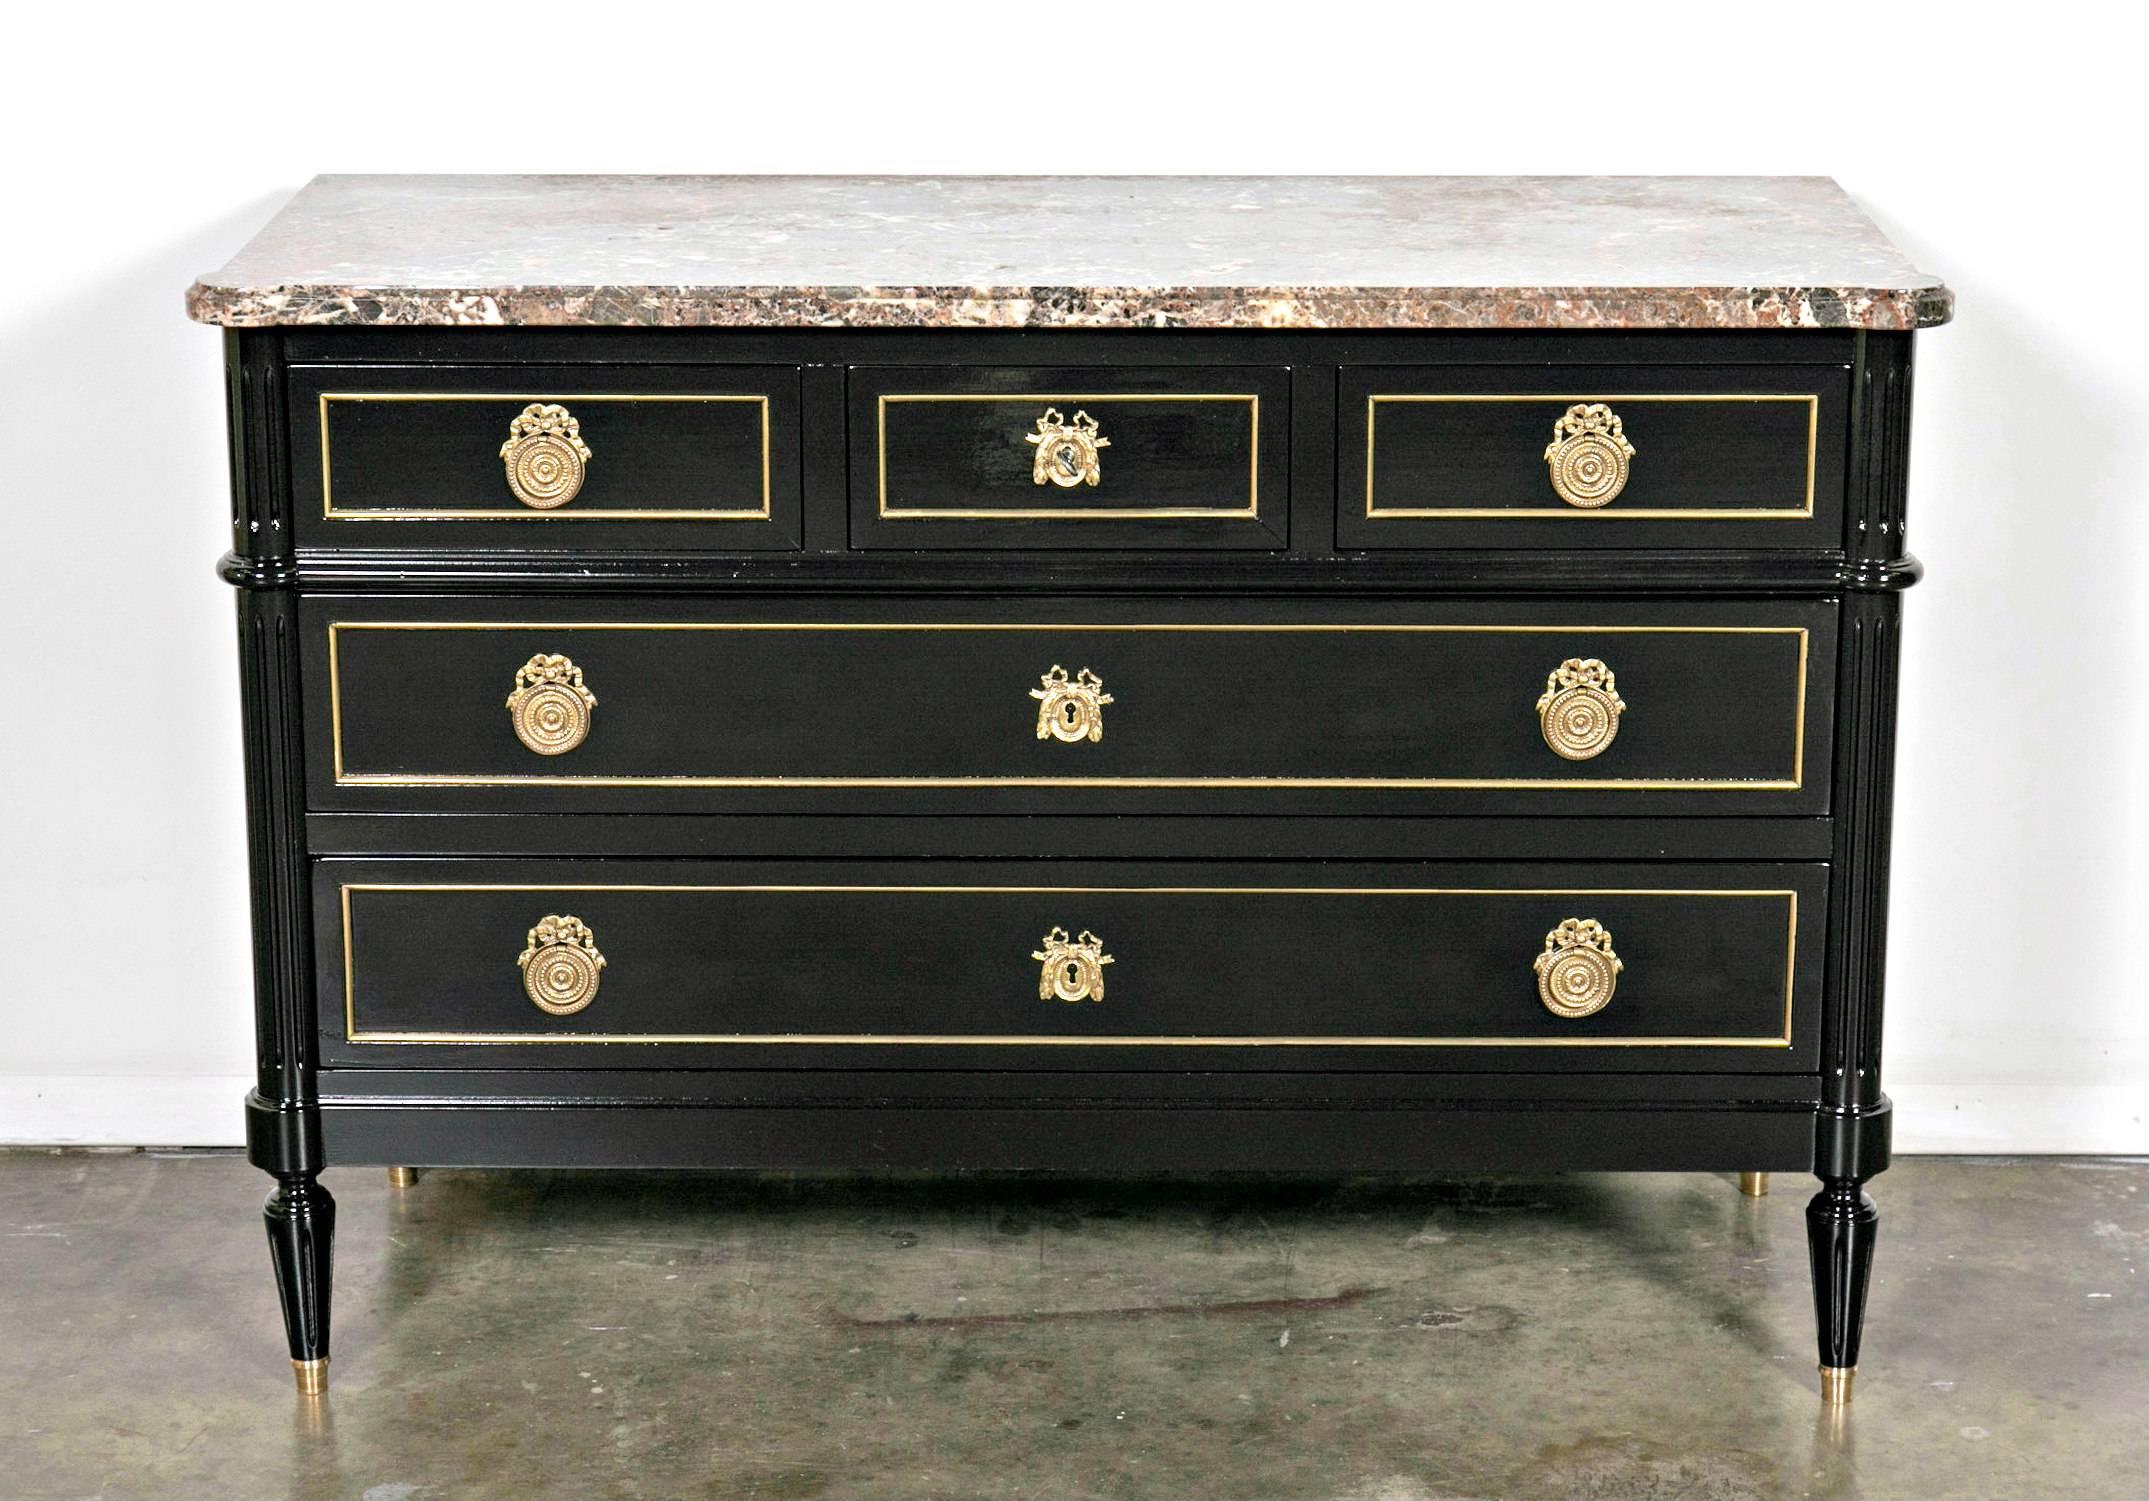 Solid mahogany Maison Jansen attributed Louis XVI style five-drawer commode, ebonized with a lustrous French polish, having a high polished Alpine Breche marble top. The five drawers retain the original bronze hardware and brass trim. Supported on